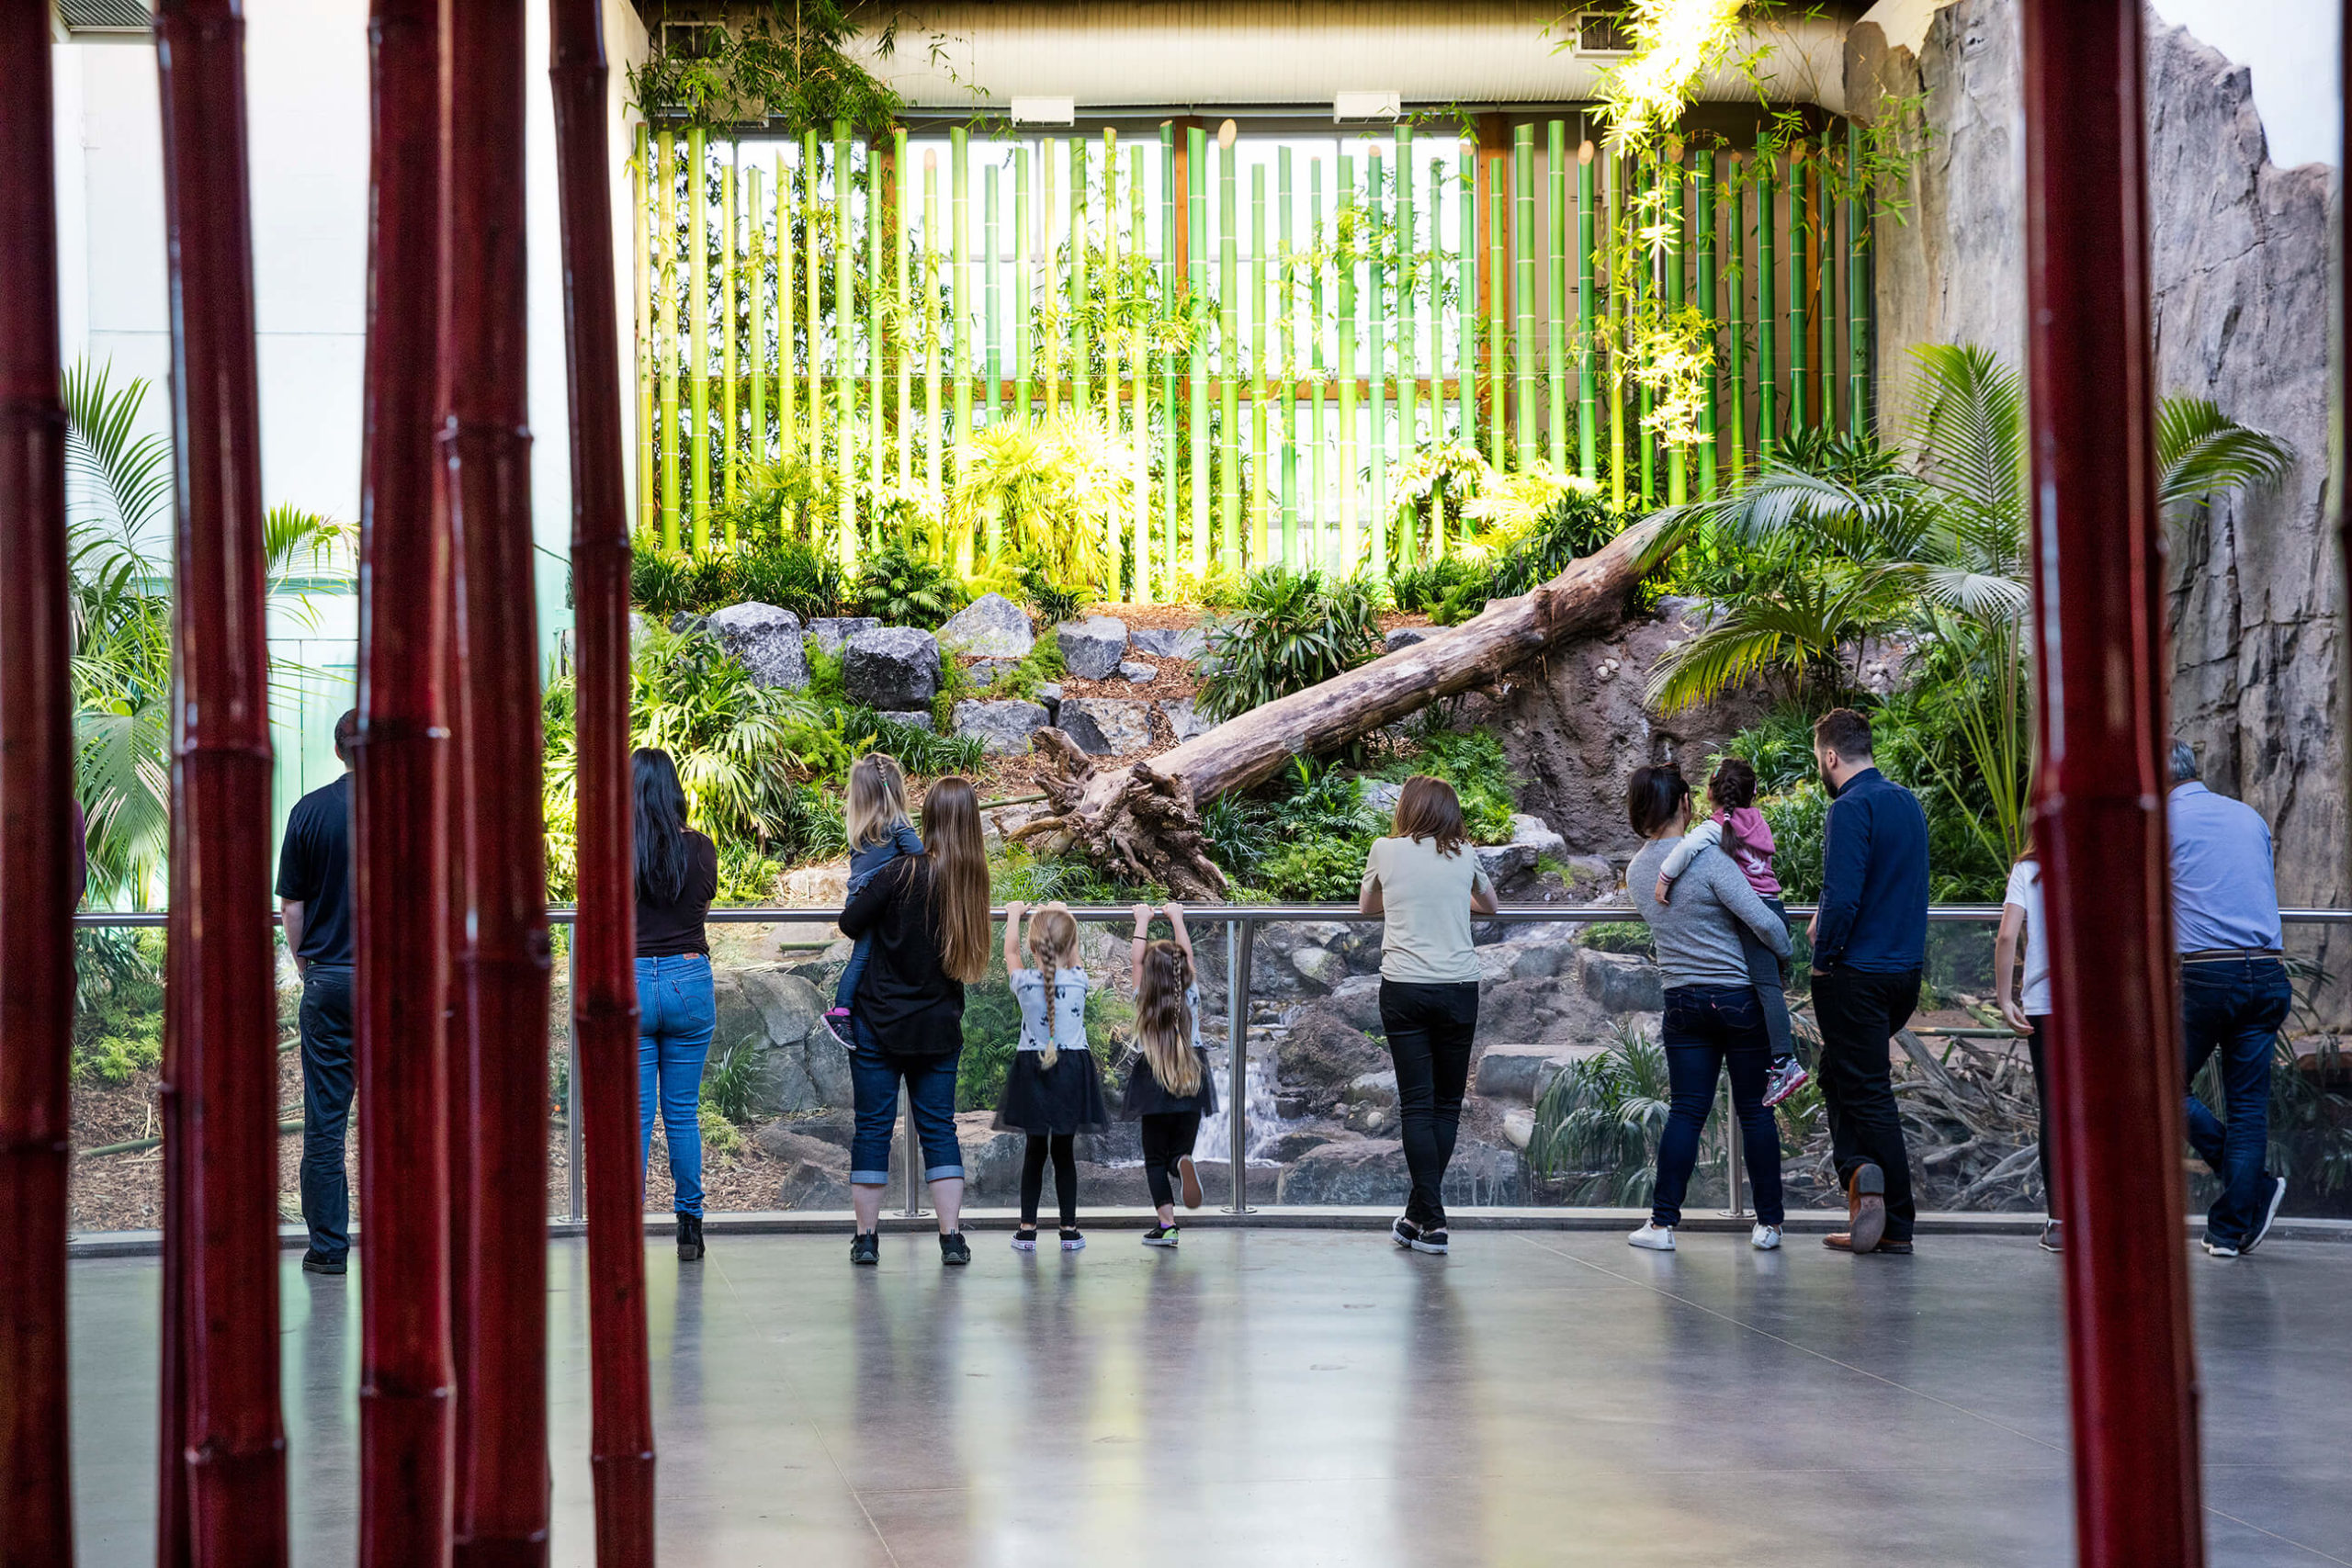 People of all ages look at Pandas in the lush, green habitat created by Zeidler and Jones and Jones for the Panda Passage at The Calgary Zoo. A clear, glass, 3-foot barrier separates visitors from the Panda's habitat. Tall, red bamboo pillars frame the space.